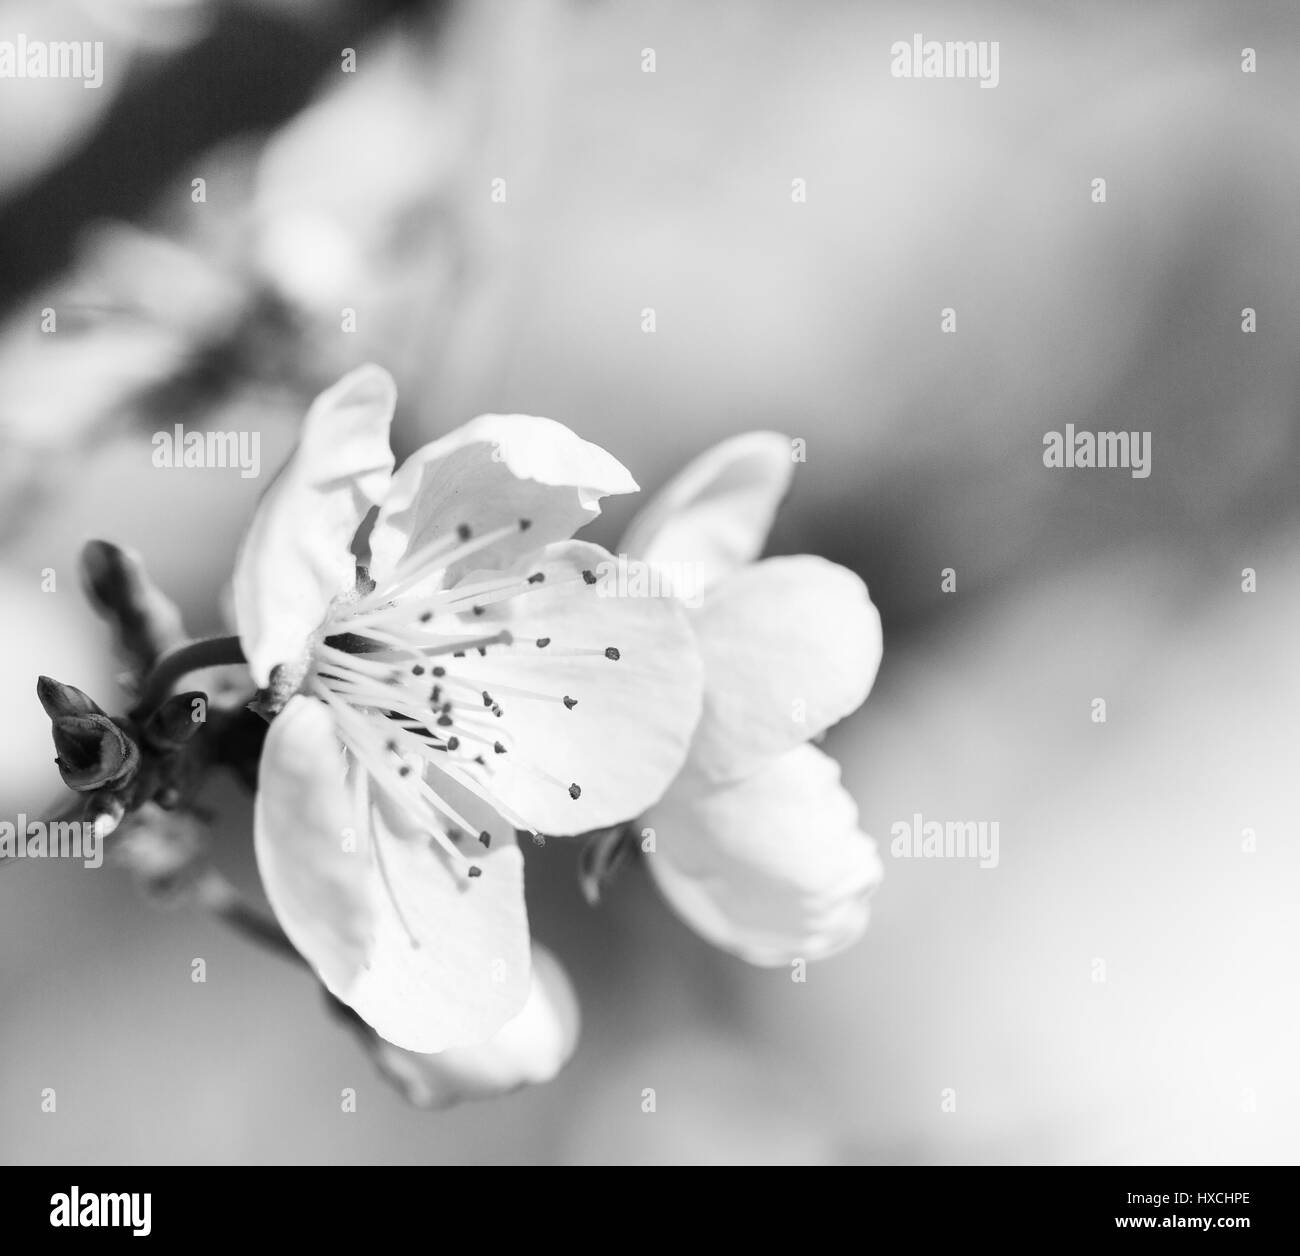 Apricot flower in early spring, square shape, black and white colors Stock Photo